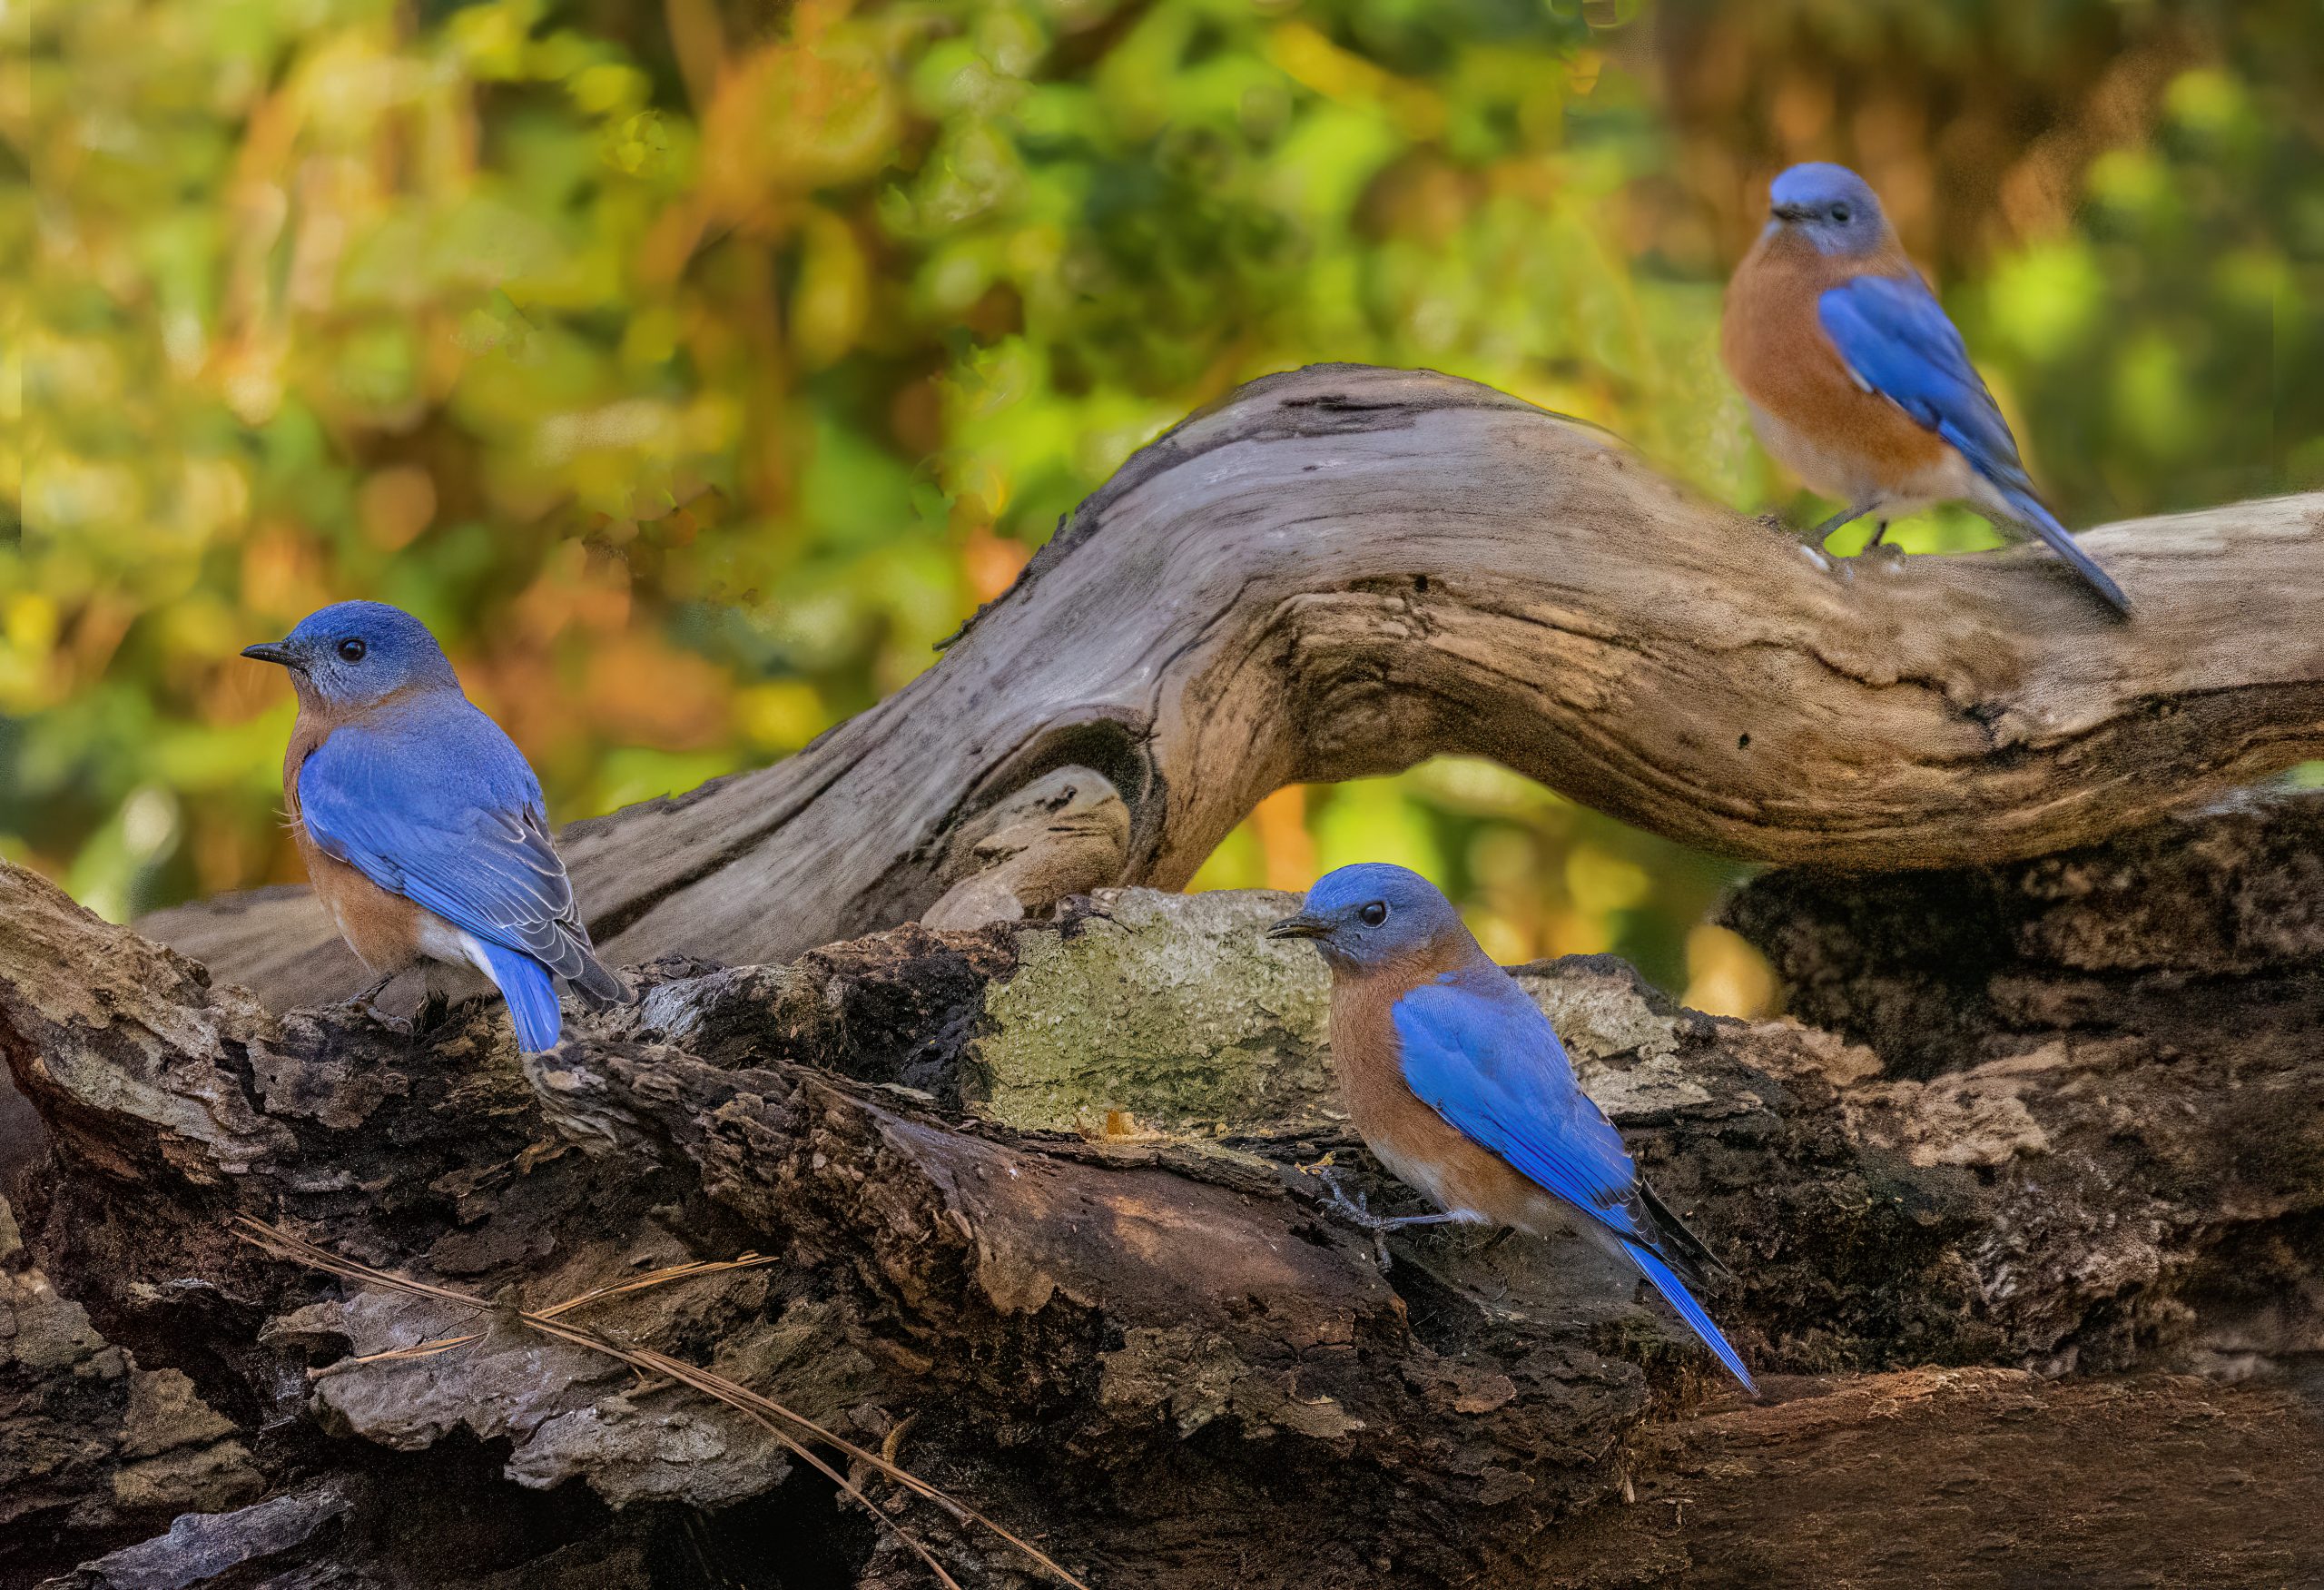 While photographing in a backyard habitat, we were very surprised to see three male bluebirds land on the same area at one time and seemingly pose for a moment, all looking the same direction. We had never seen this before — what a treat!